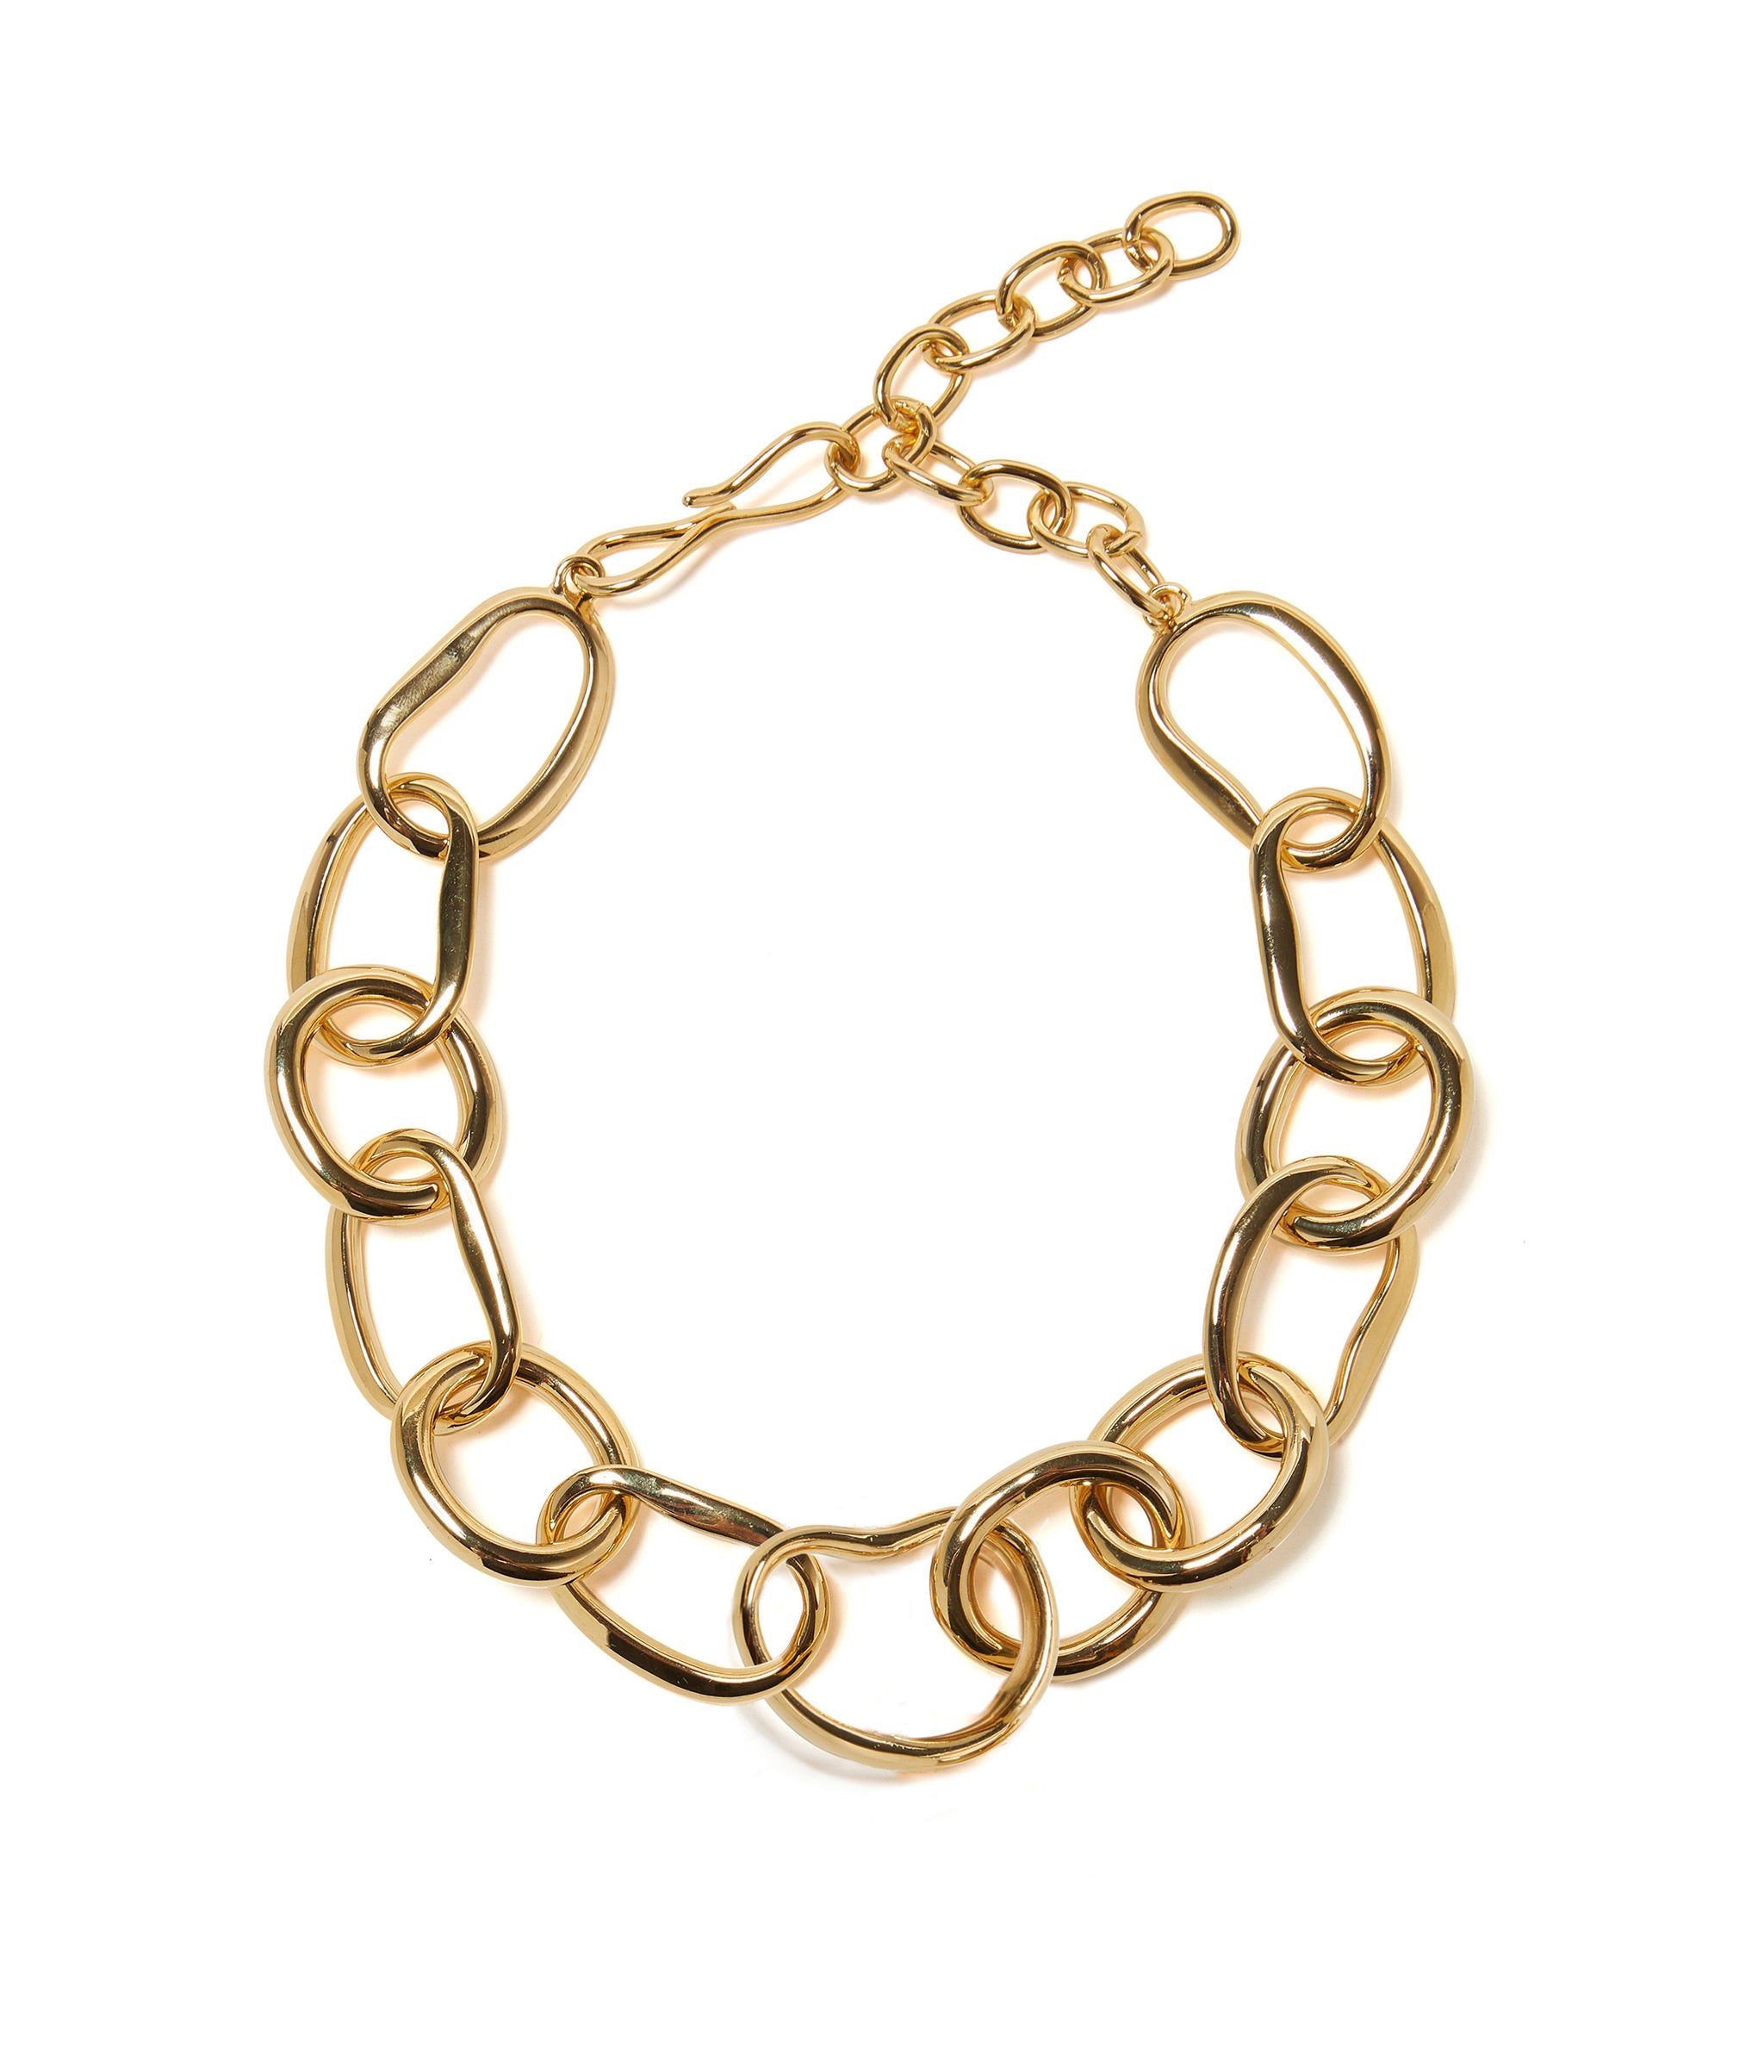 Porto Chain. Gold-plated brass necklace chain with oversized abstract bean-shaped links.